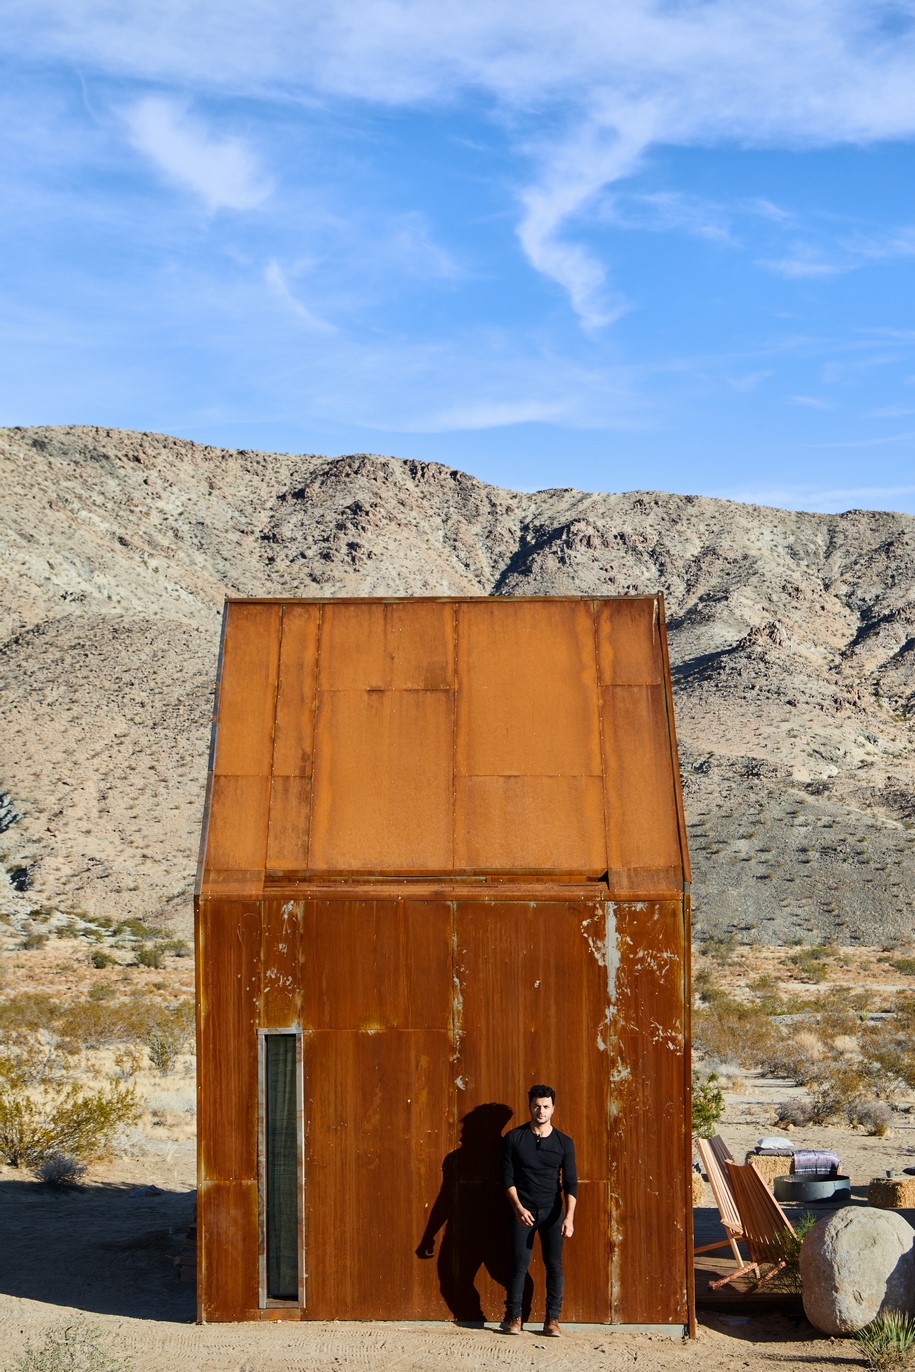 Archisearch The Folly cabin by Cohesion Studio offers the perfect off grid experience under the stars